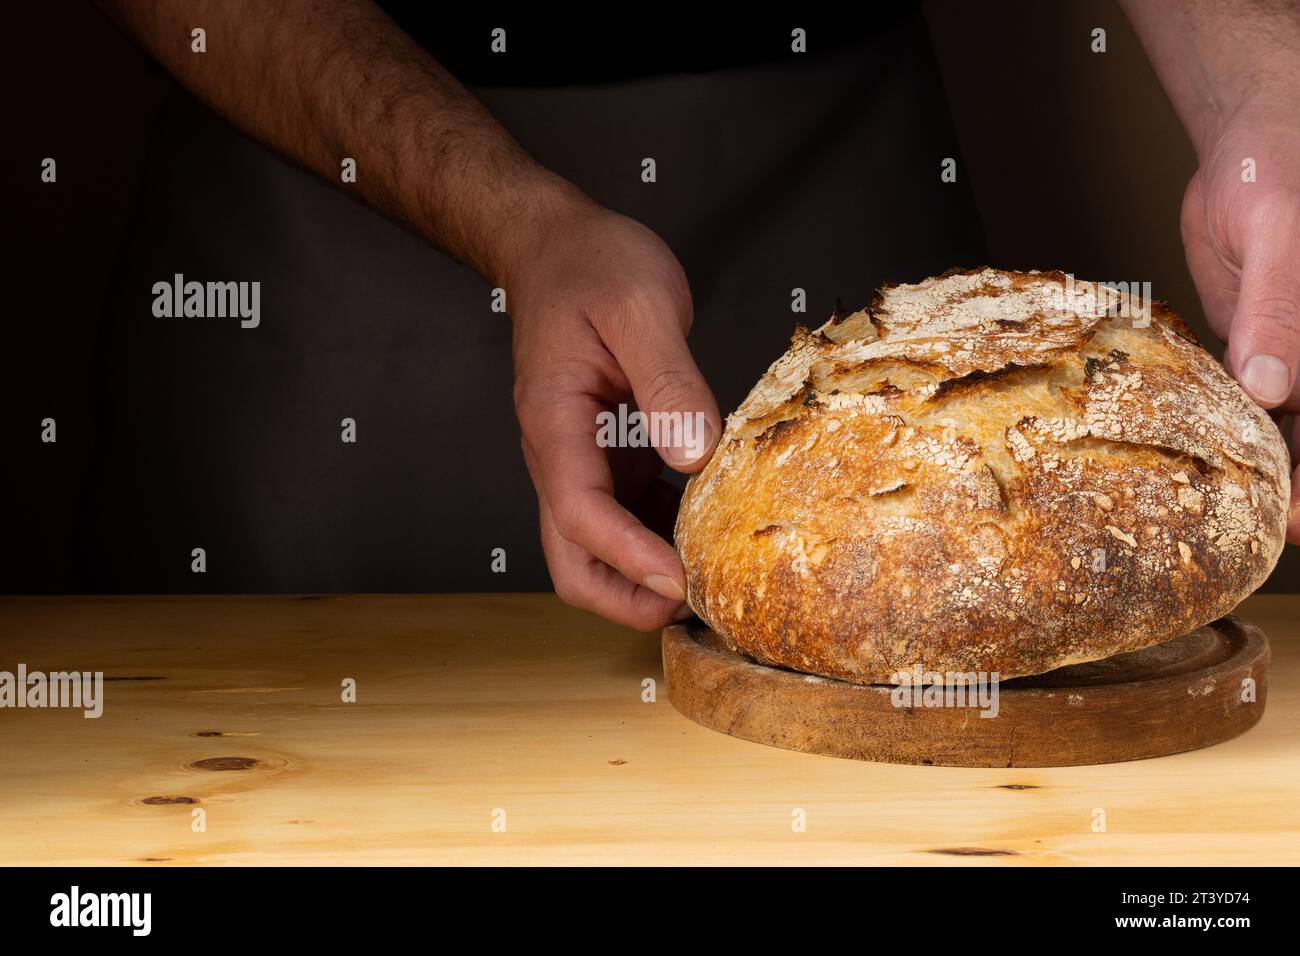 The hands of a young man handling sourdough bread, highlighting the bread with beautiful golden tones against the dark background. Stock Photo